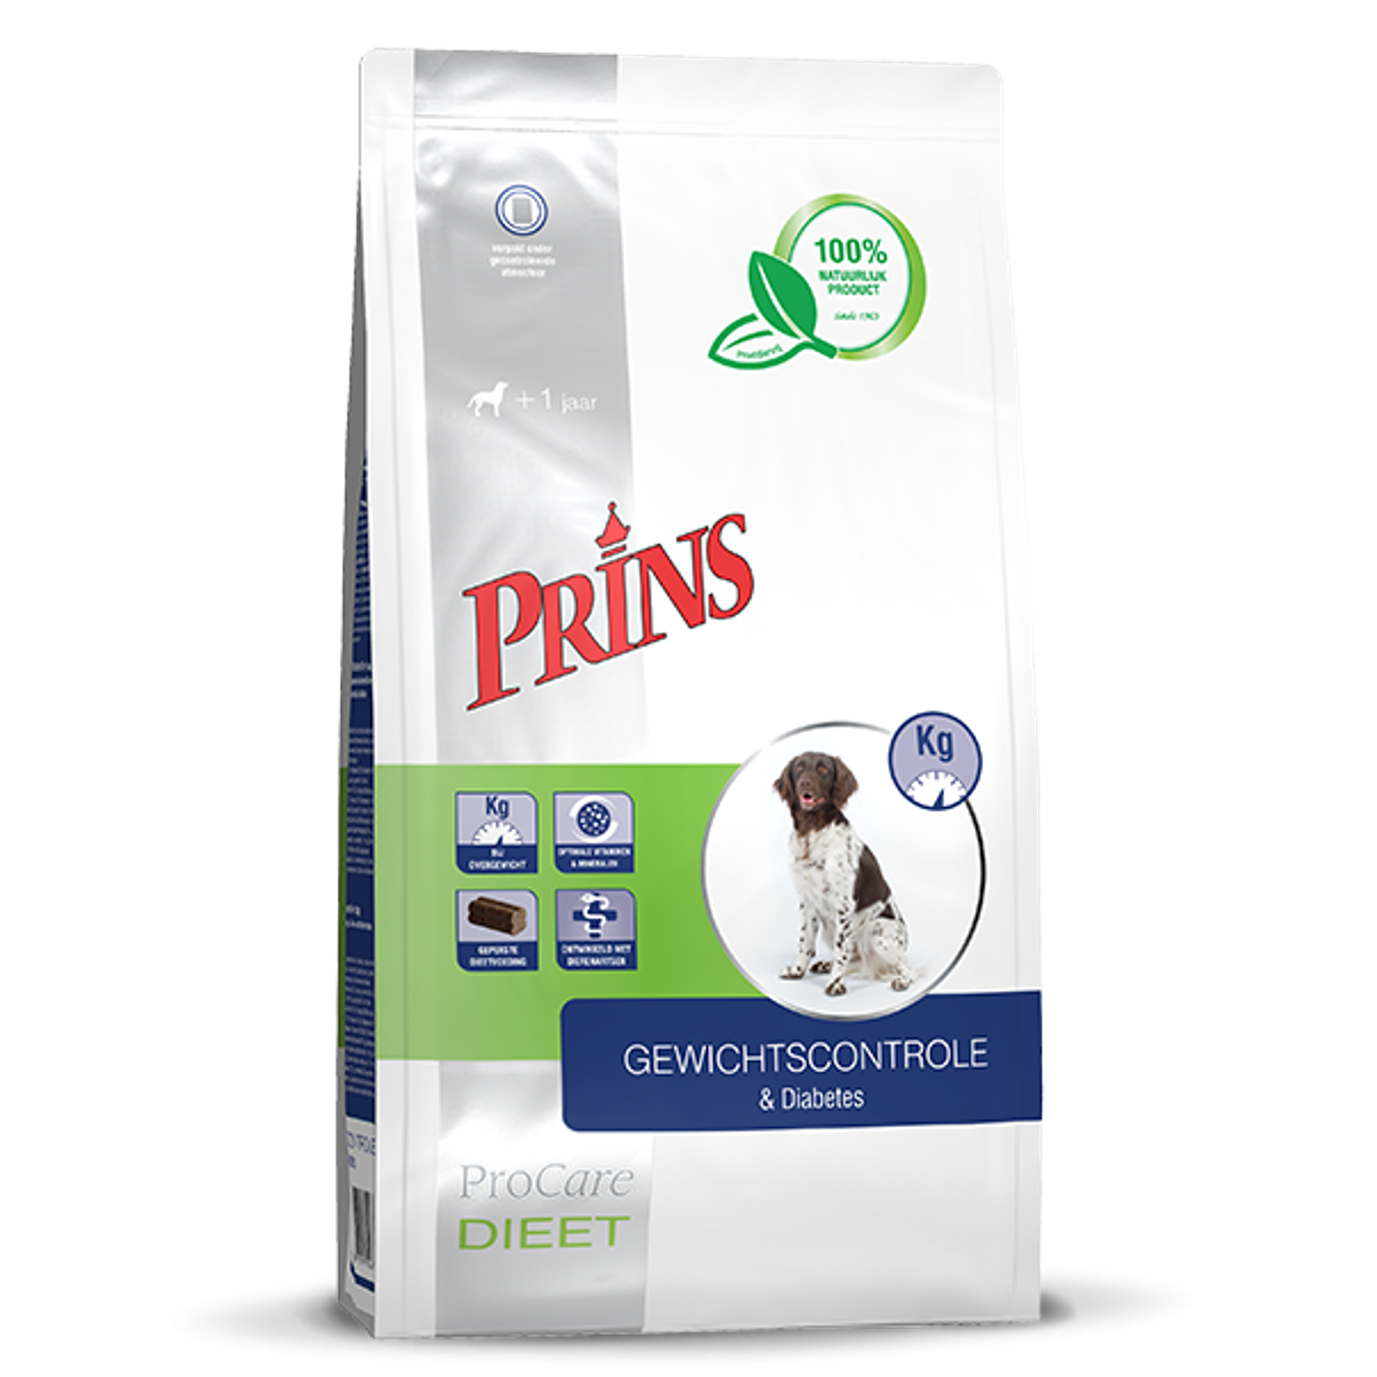 Prins ProCare Diet WEIGHT REDUCTION & Diabetic (Gewichtcontrole), Dry Dog Food With Poultry, 15kg